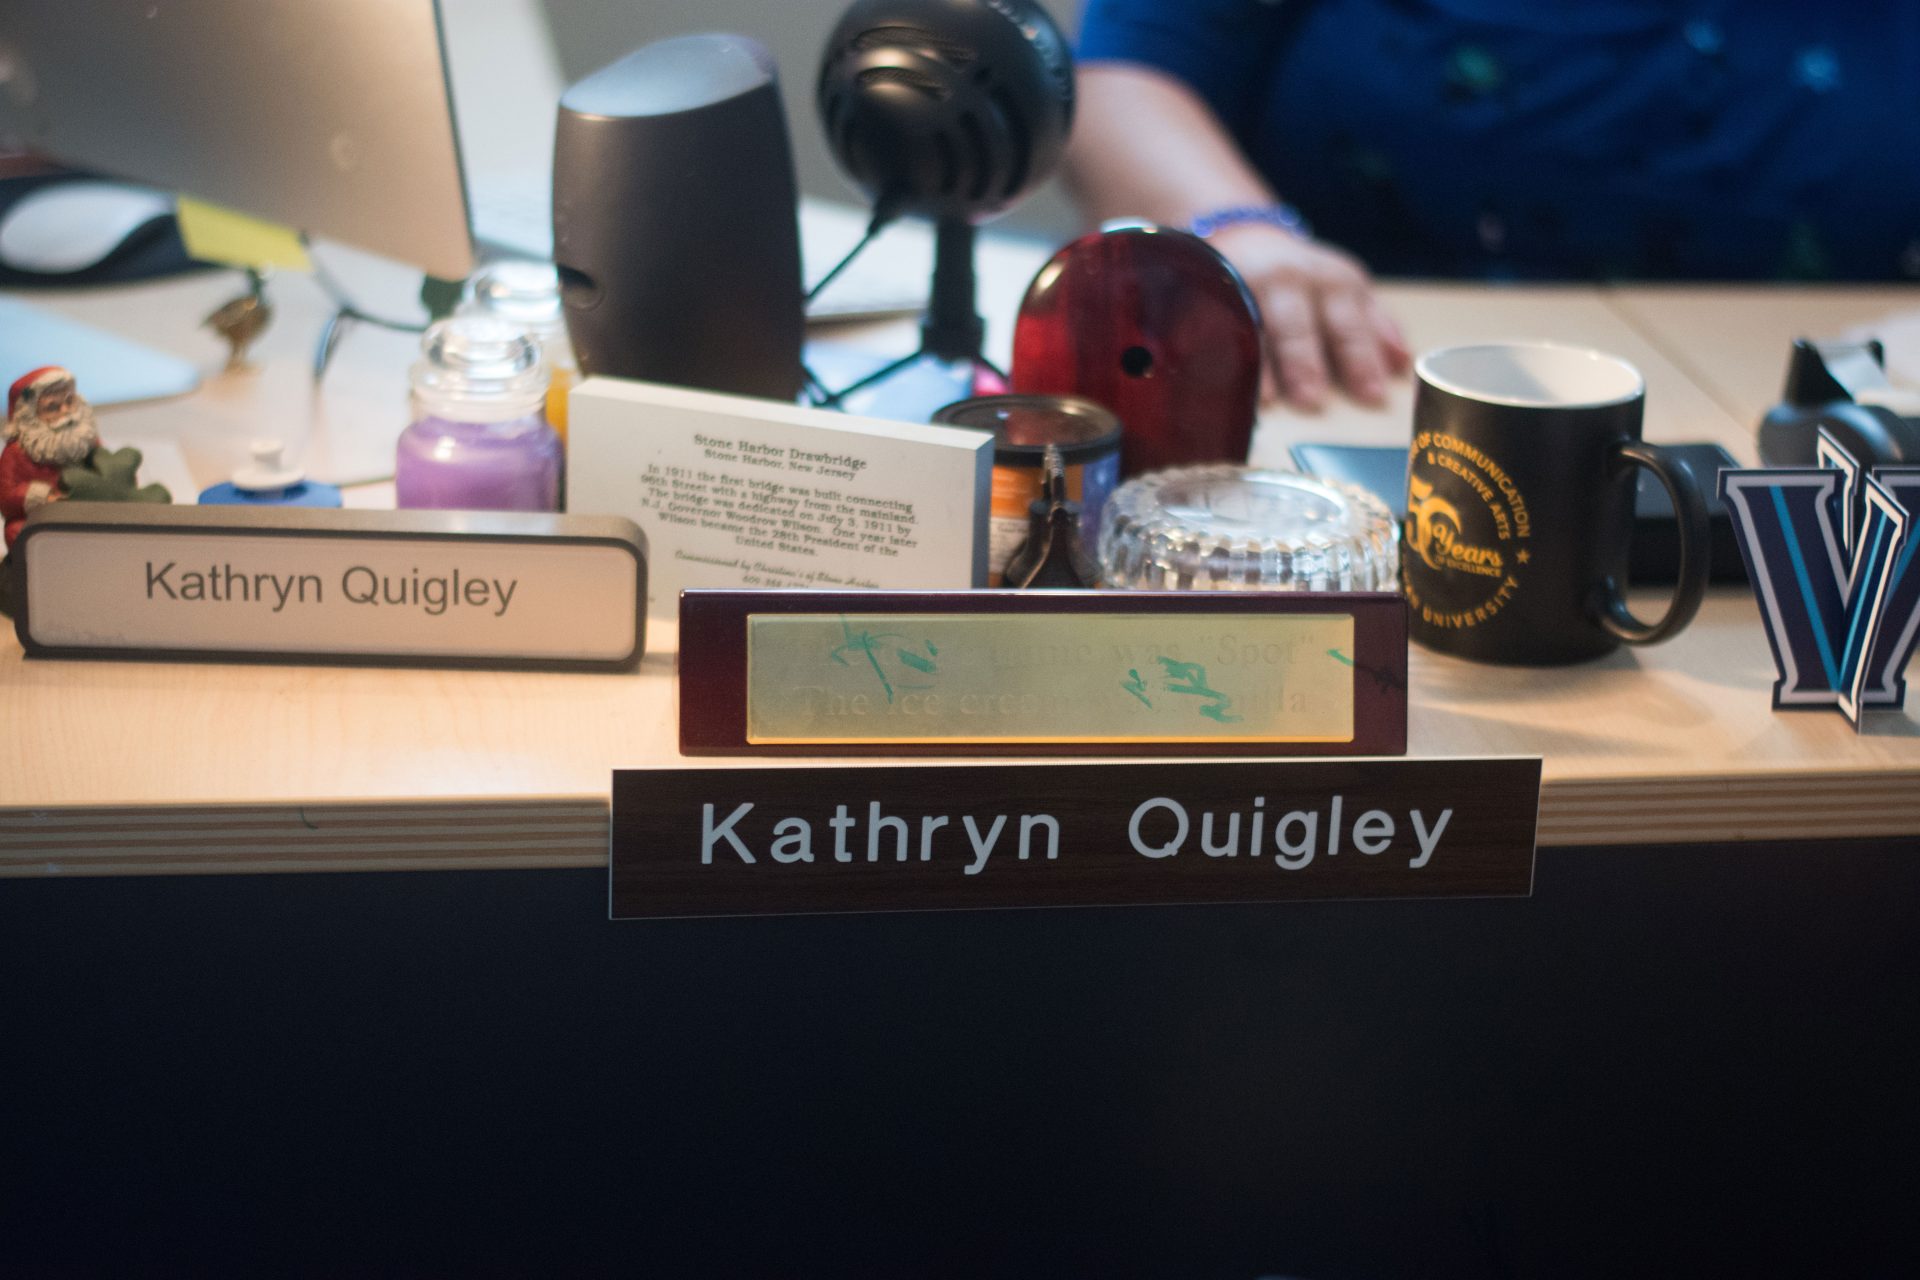 The name plaques of Professor Kathryn Quigley on her desk in her office